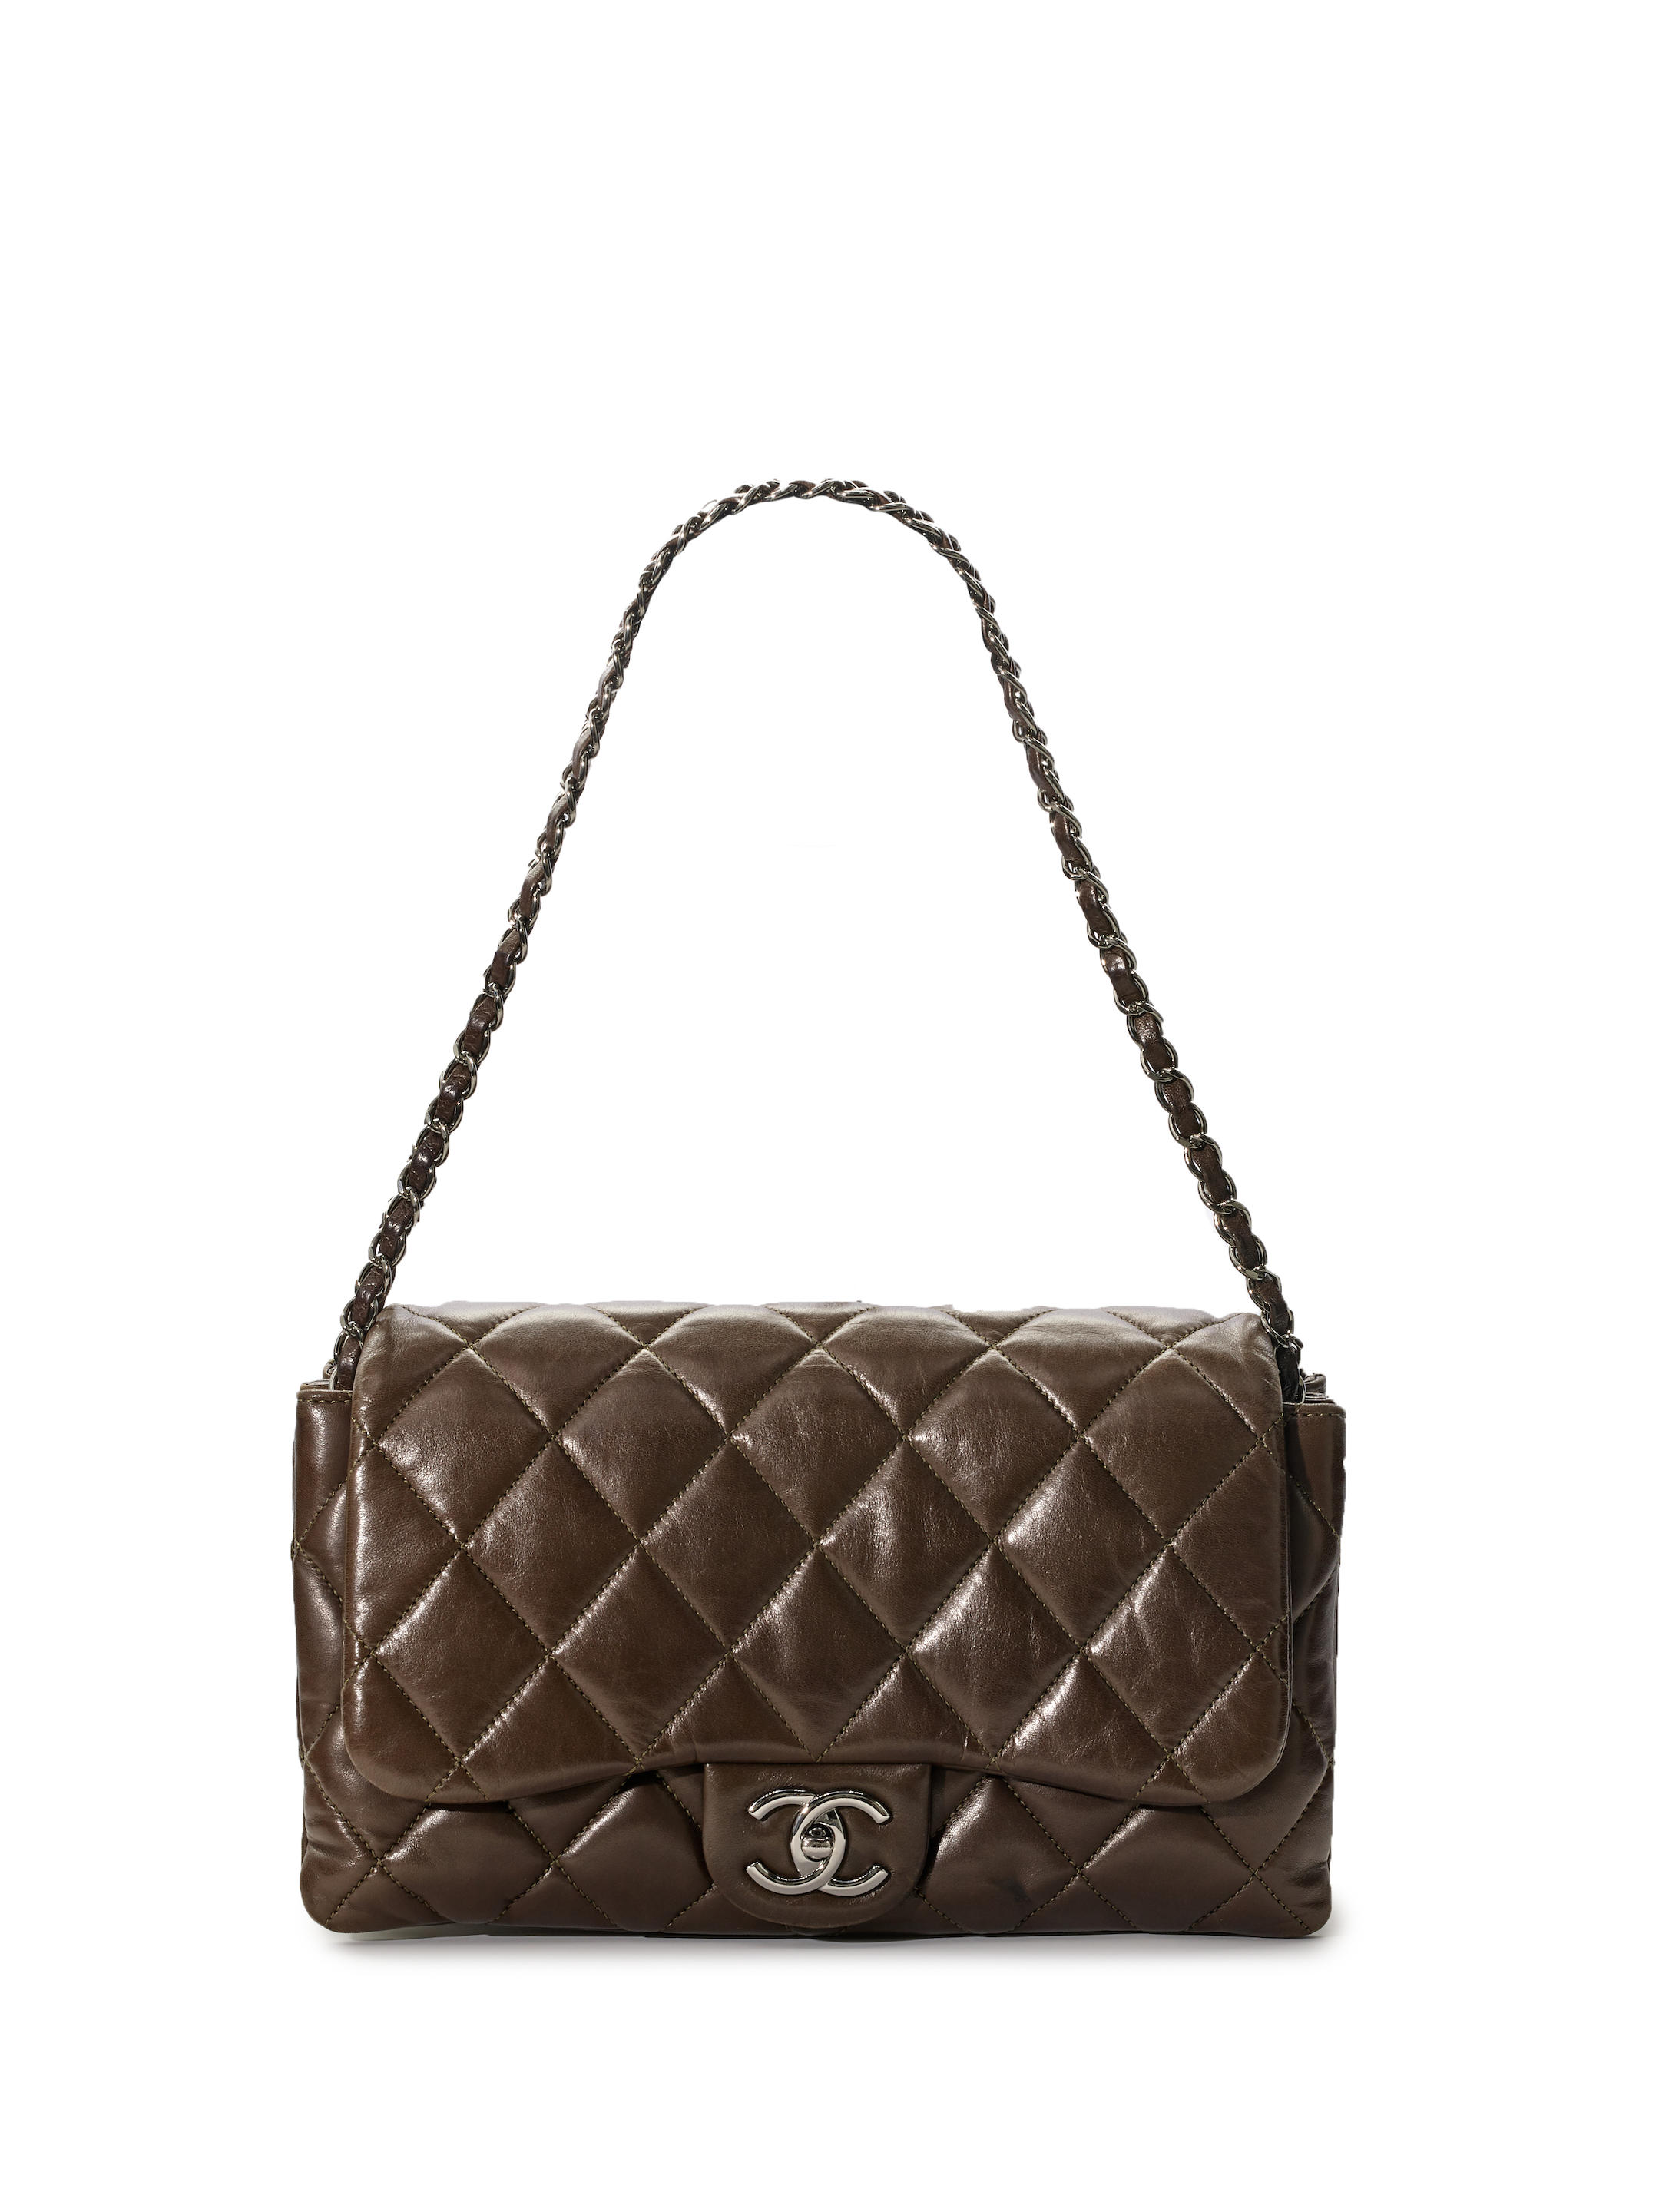 CHANEL BROWN LAMBSKIN QUILTED CLASSIC FLAP BAG WITH SILVER TONED CHAIN  (includes serial sticker, info booklet, authenticity card, original dust  bag and box) - Bonhams